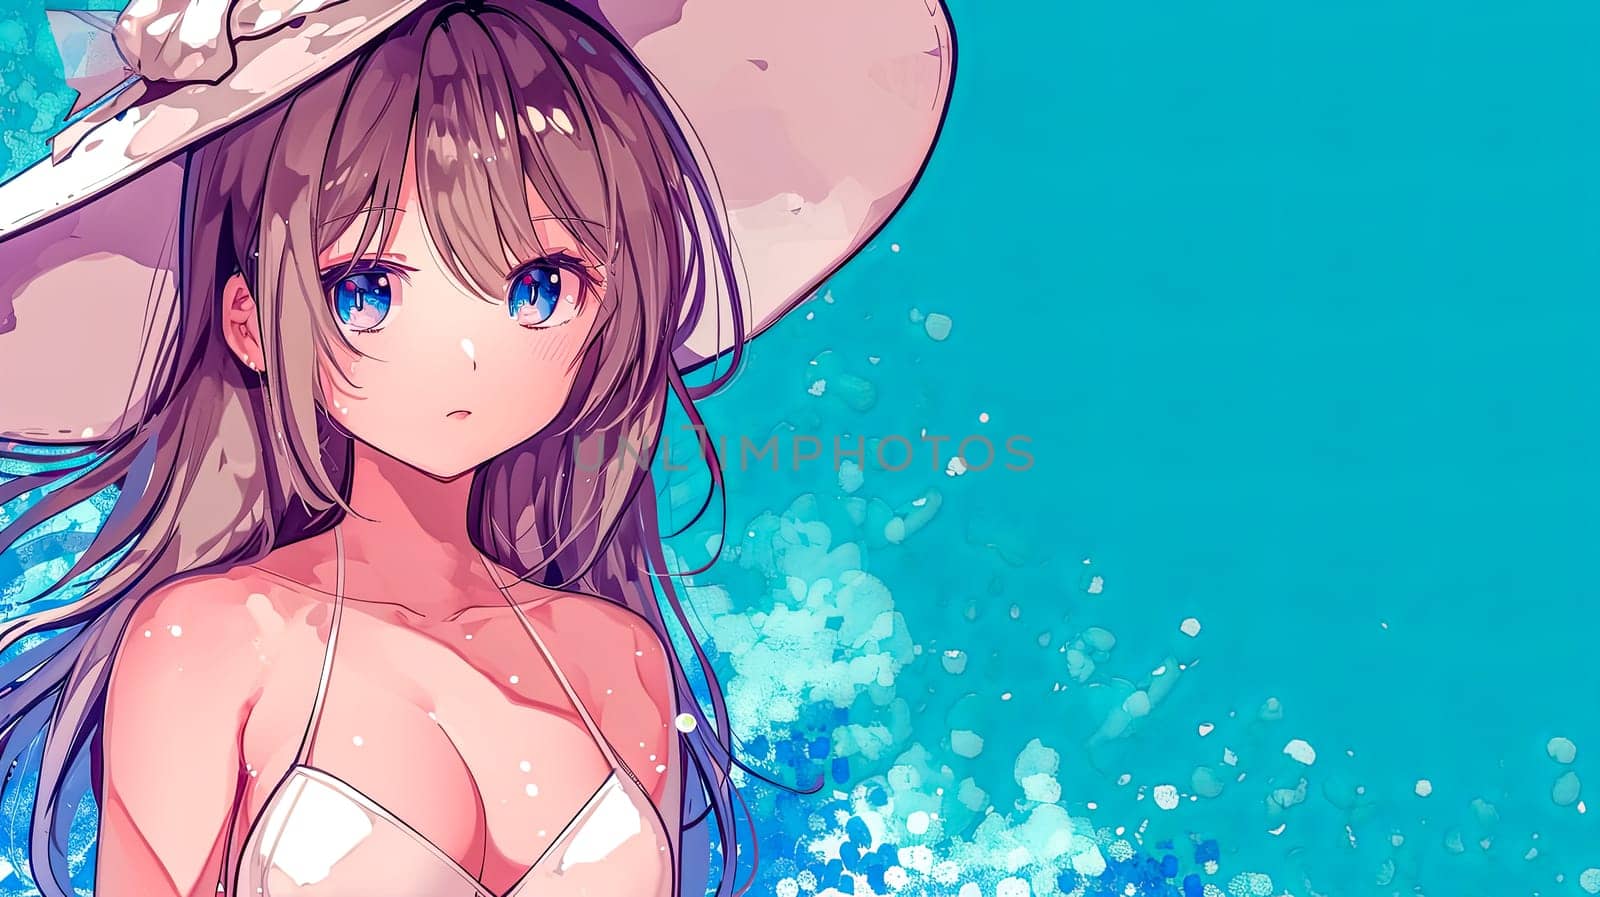 anime-style illustration featuring a character with striking blue eyes and long hair, wearing a sun hat and a bikini, with a blue, watercolor-like backdrop, banner with copy space